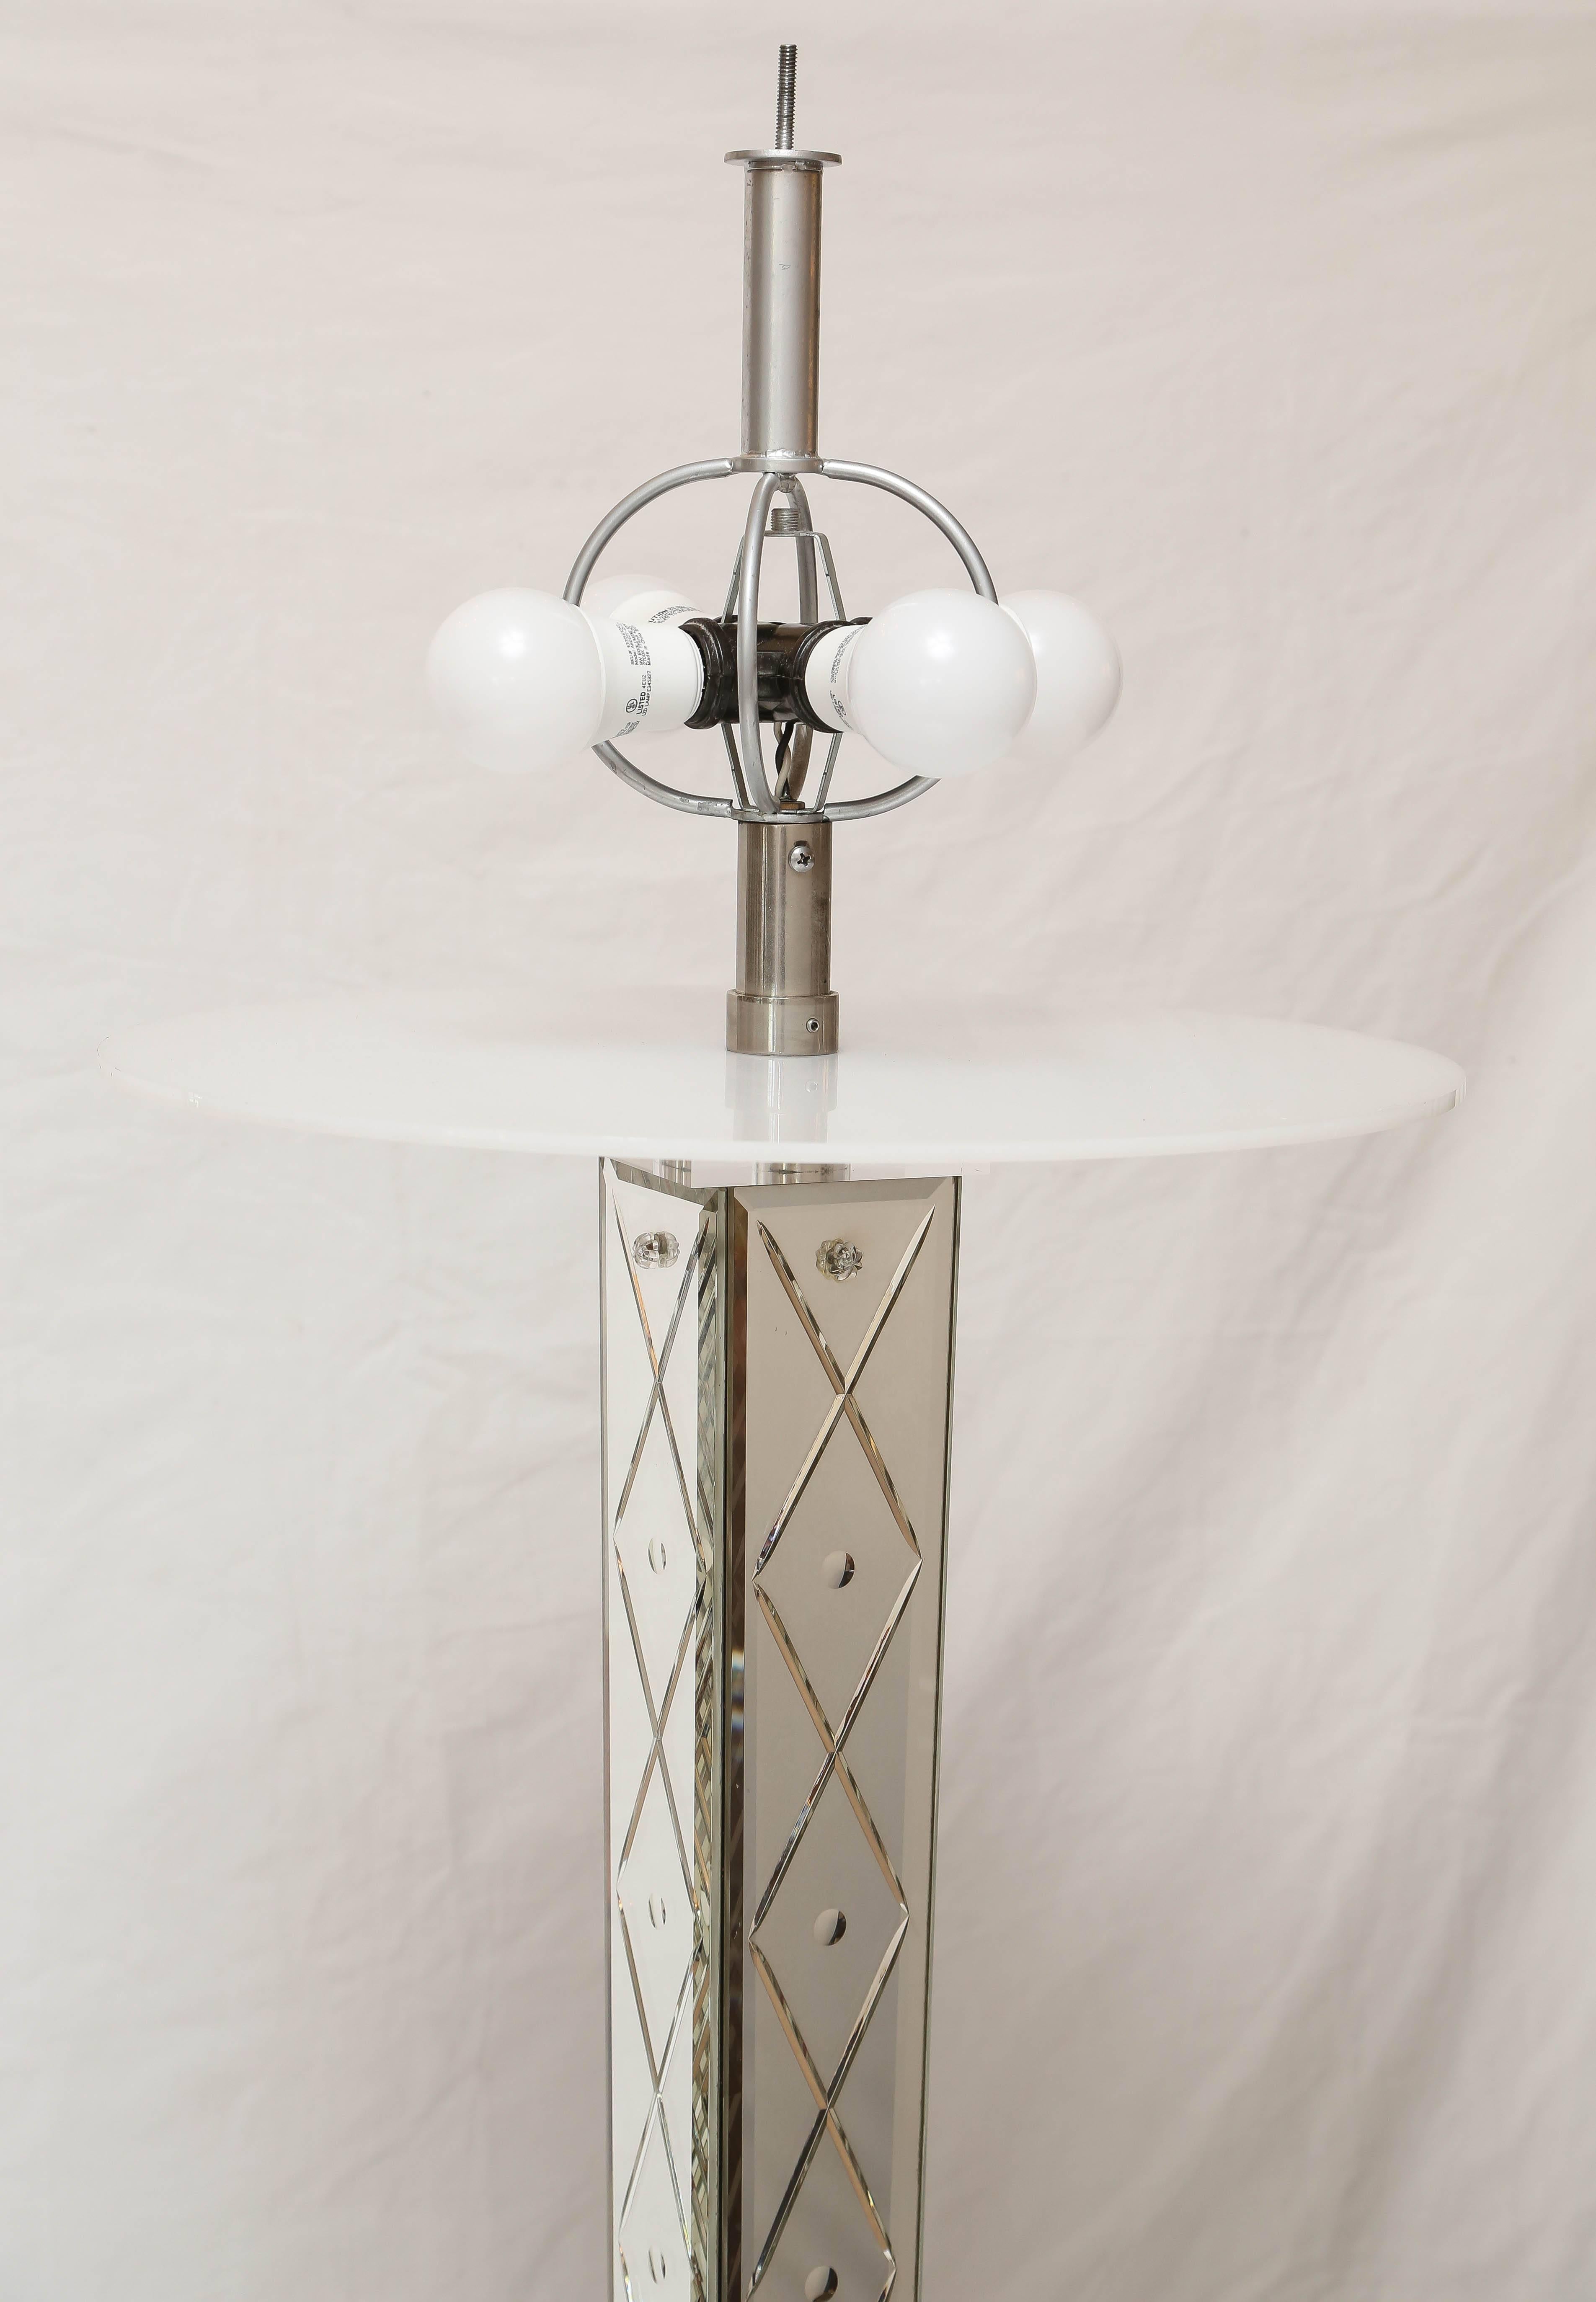 Custom designed by Philippe Starck for the Delano hotel on Miami Beach in 1985. The stem has mirrored panels with glass etched flowers and the original custom heavy steel shade with diamond cut pattern. This is a unique piece created for an iconic